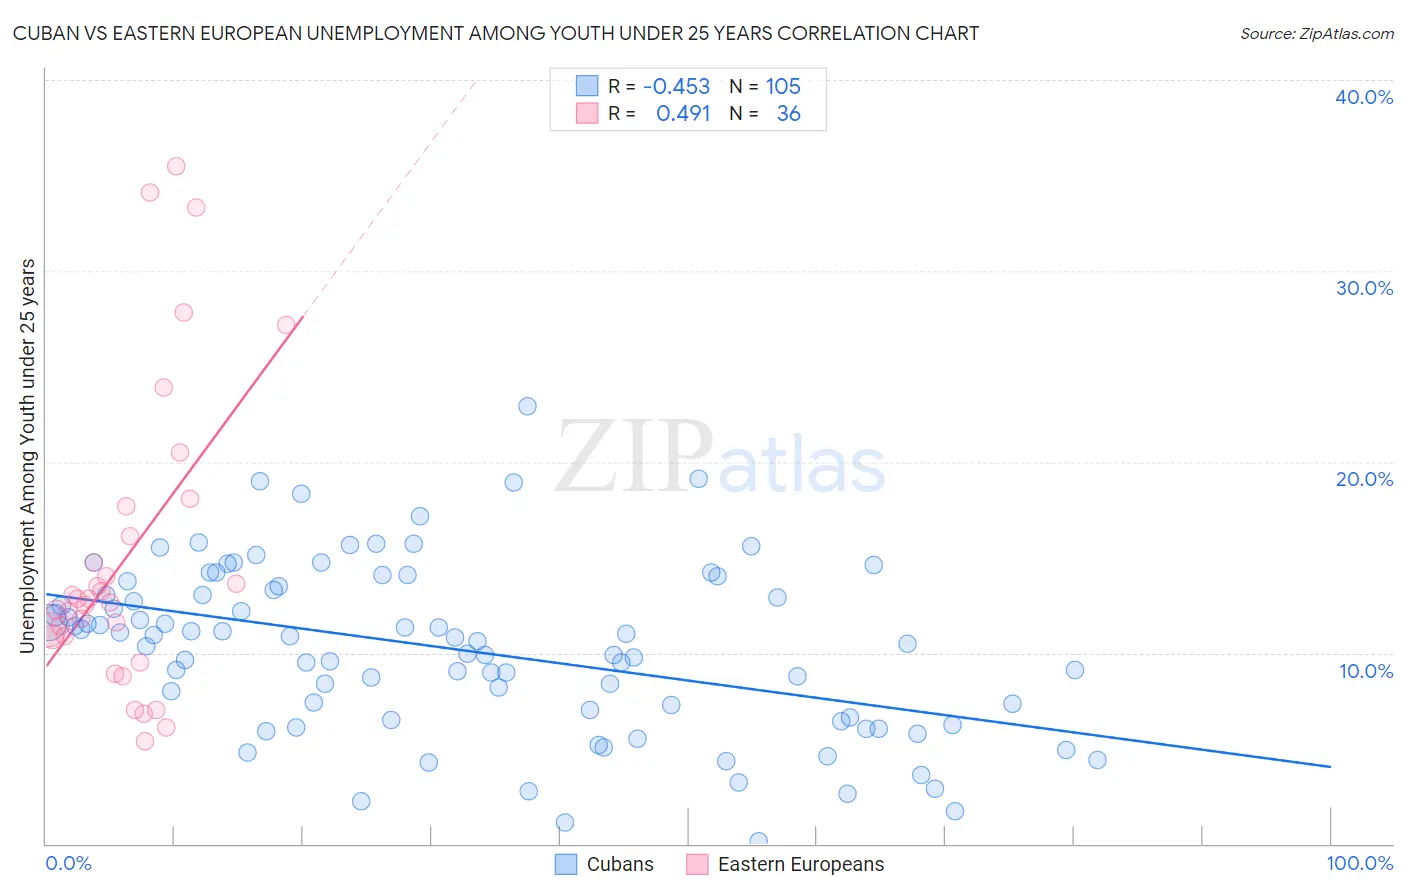 Cuban vs Eastern European Unemployment Among Youth under 25 years